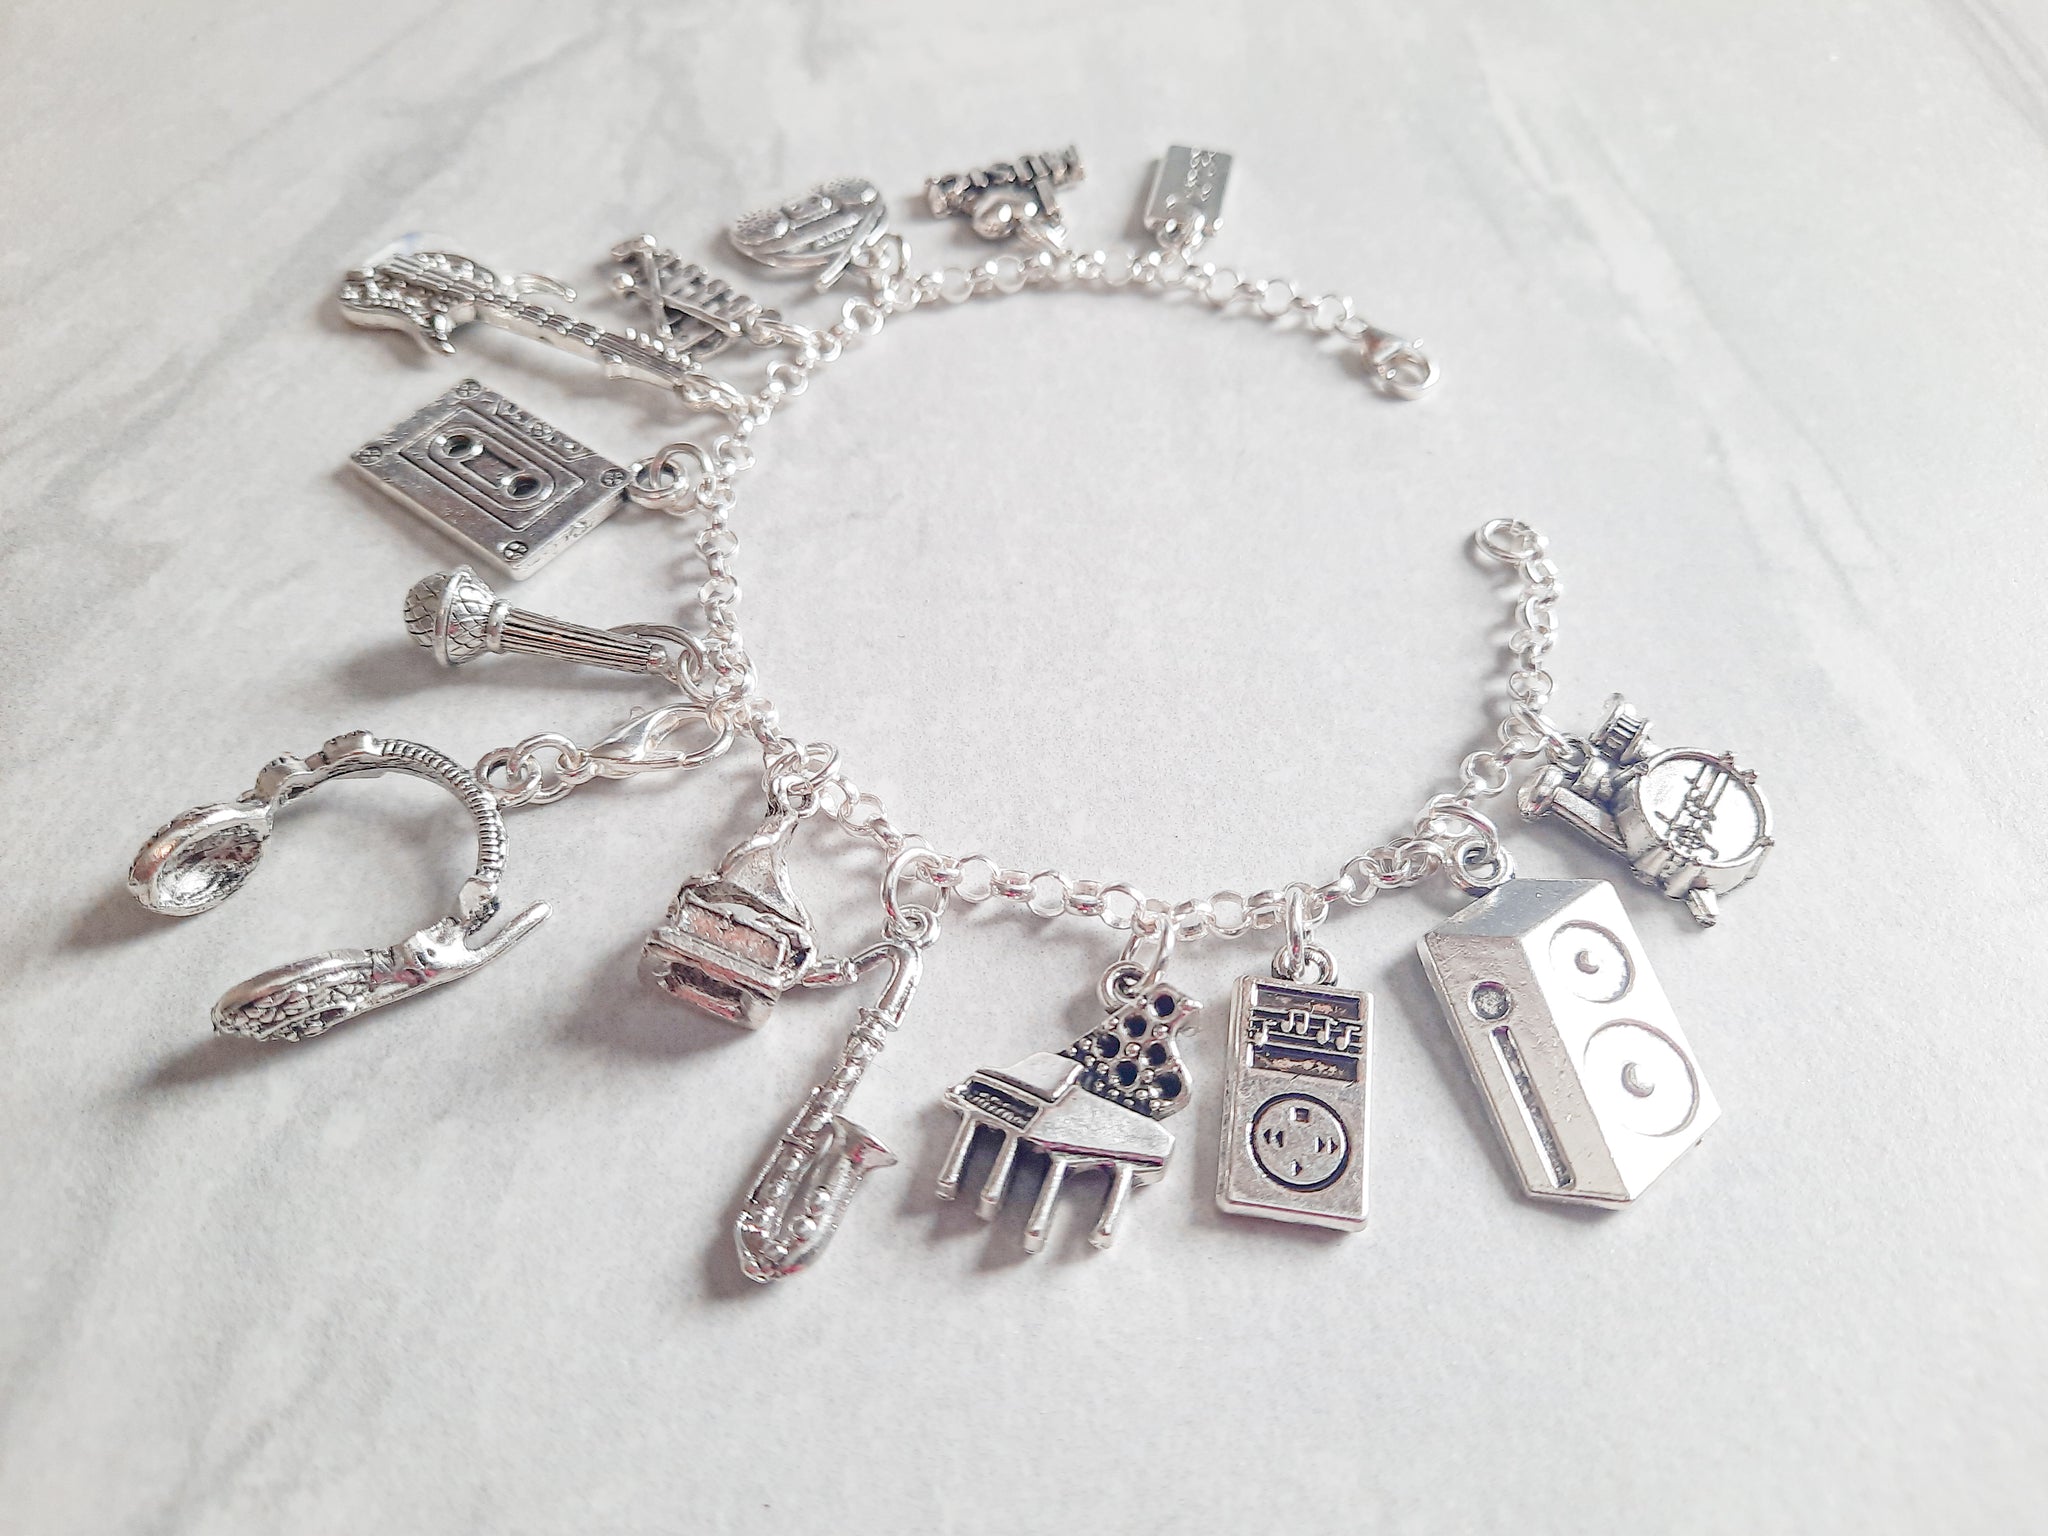 Music Lover Charm Bracelet - Jillicious charms and accessories